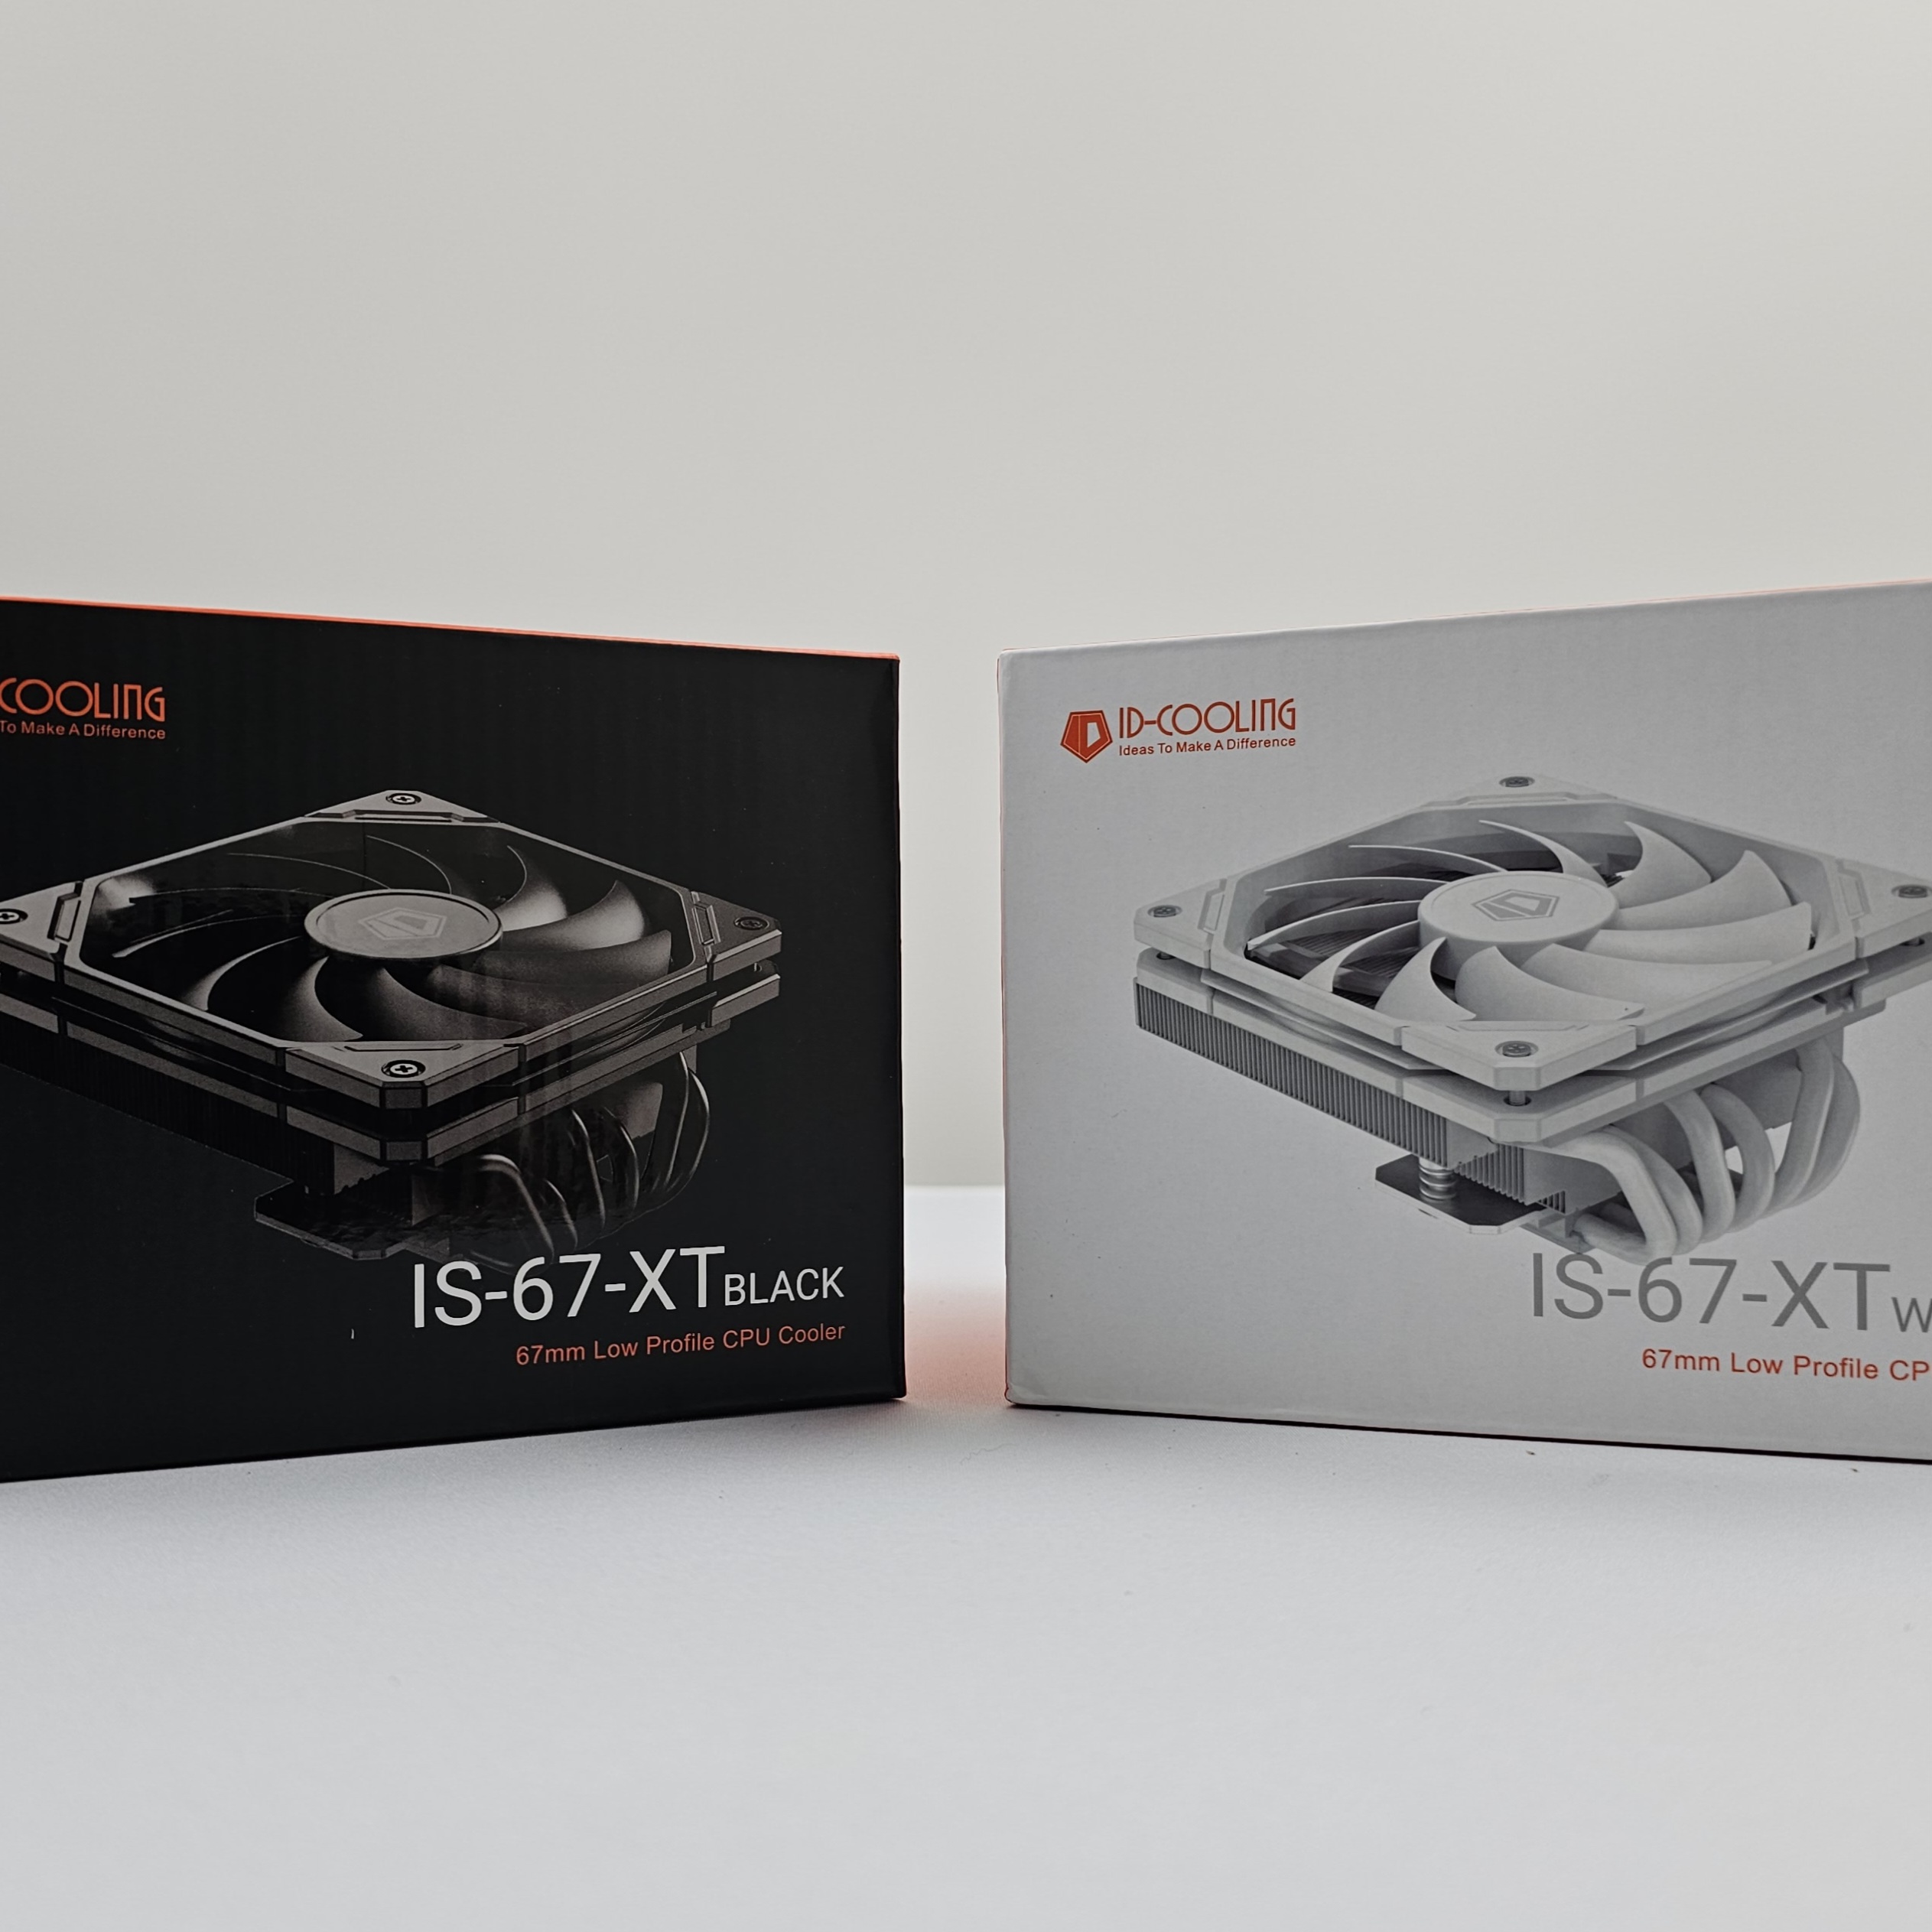 Featured image for “IDCOOLING IS-67-XT Review”